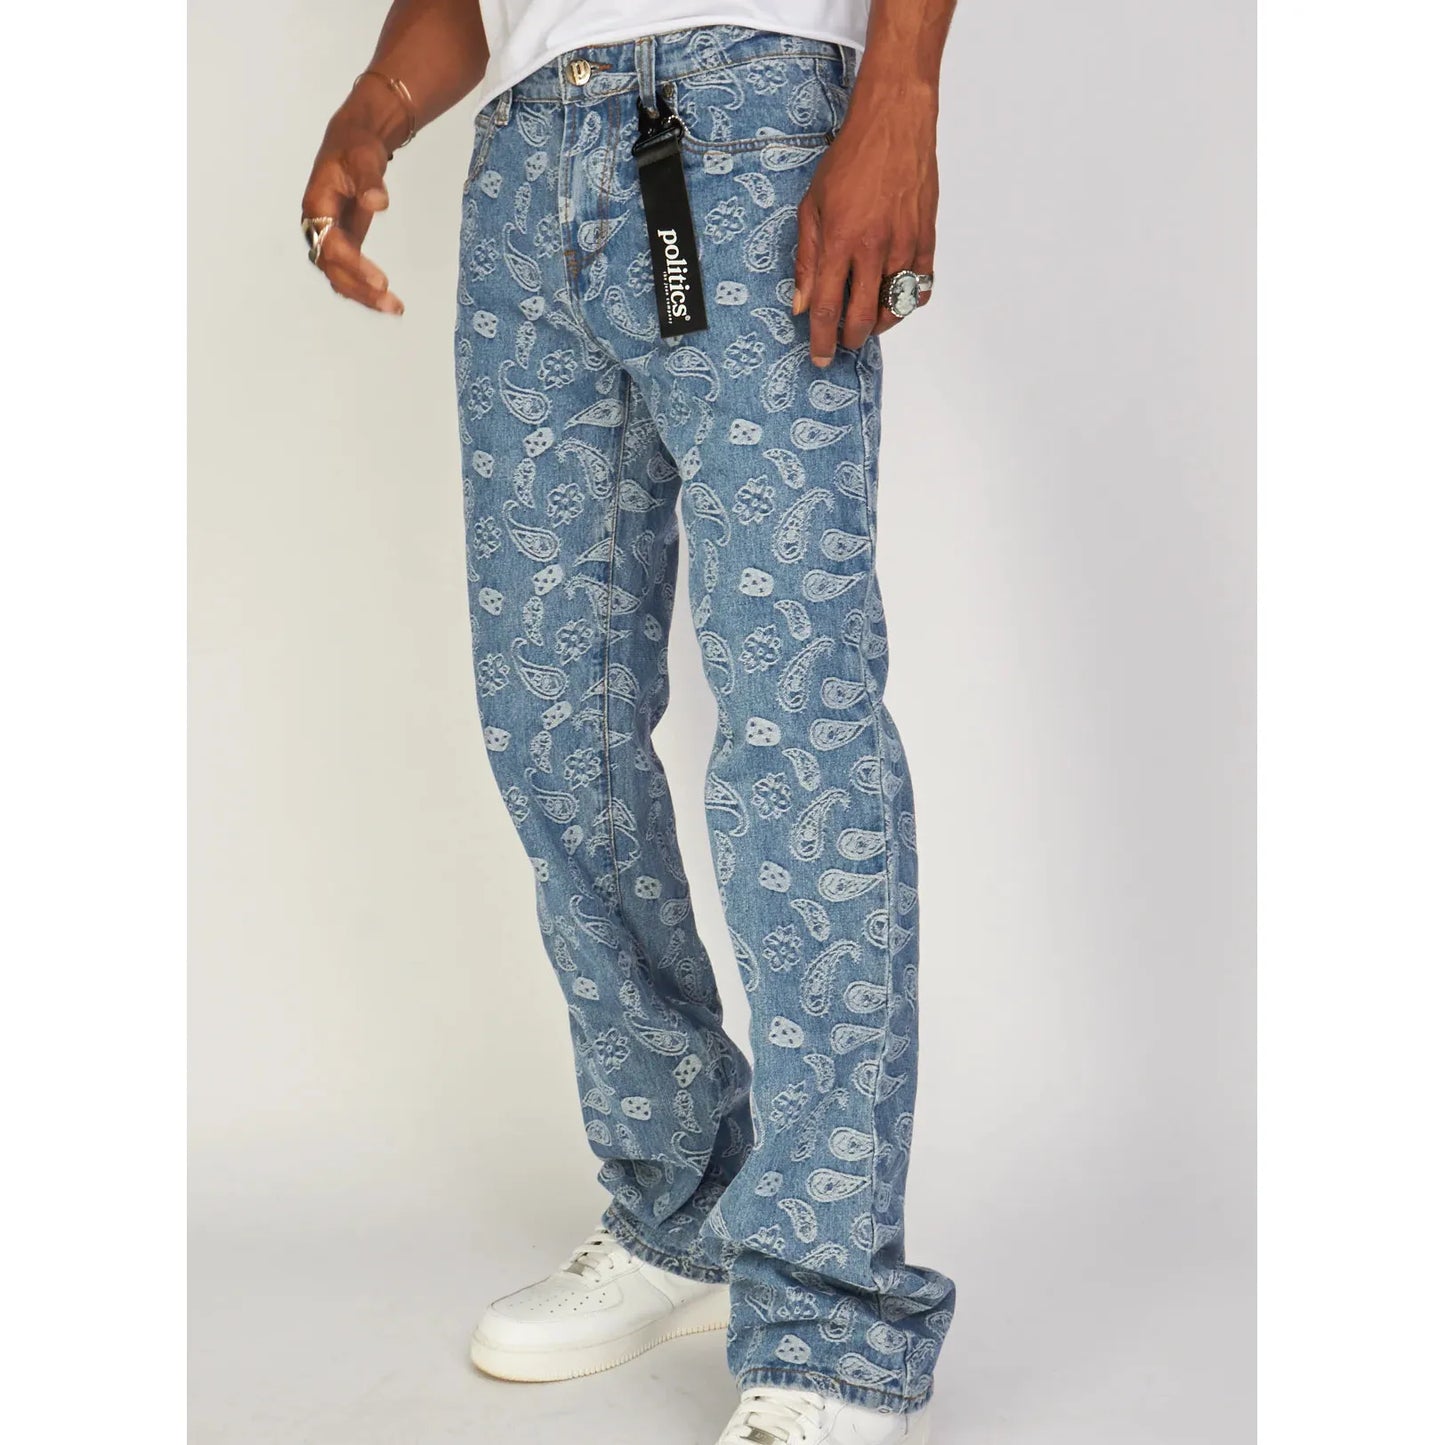 Politics Jeans Relaxed Fit Blue Jacquard (Beckman521)